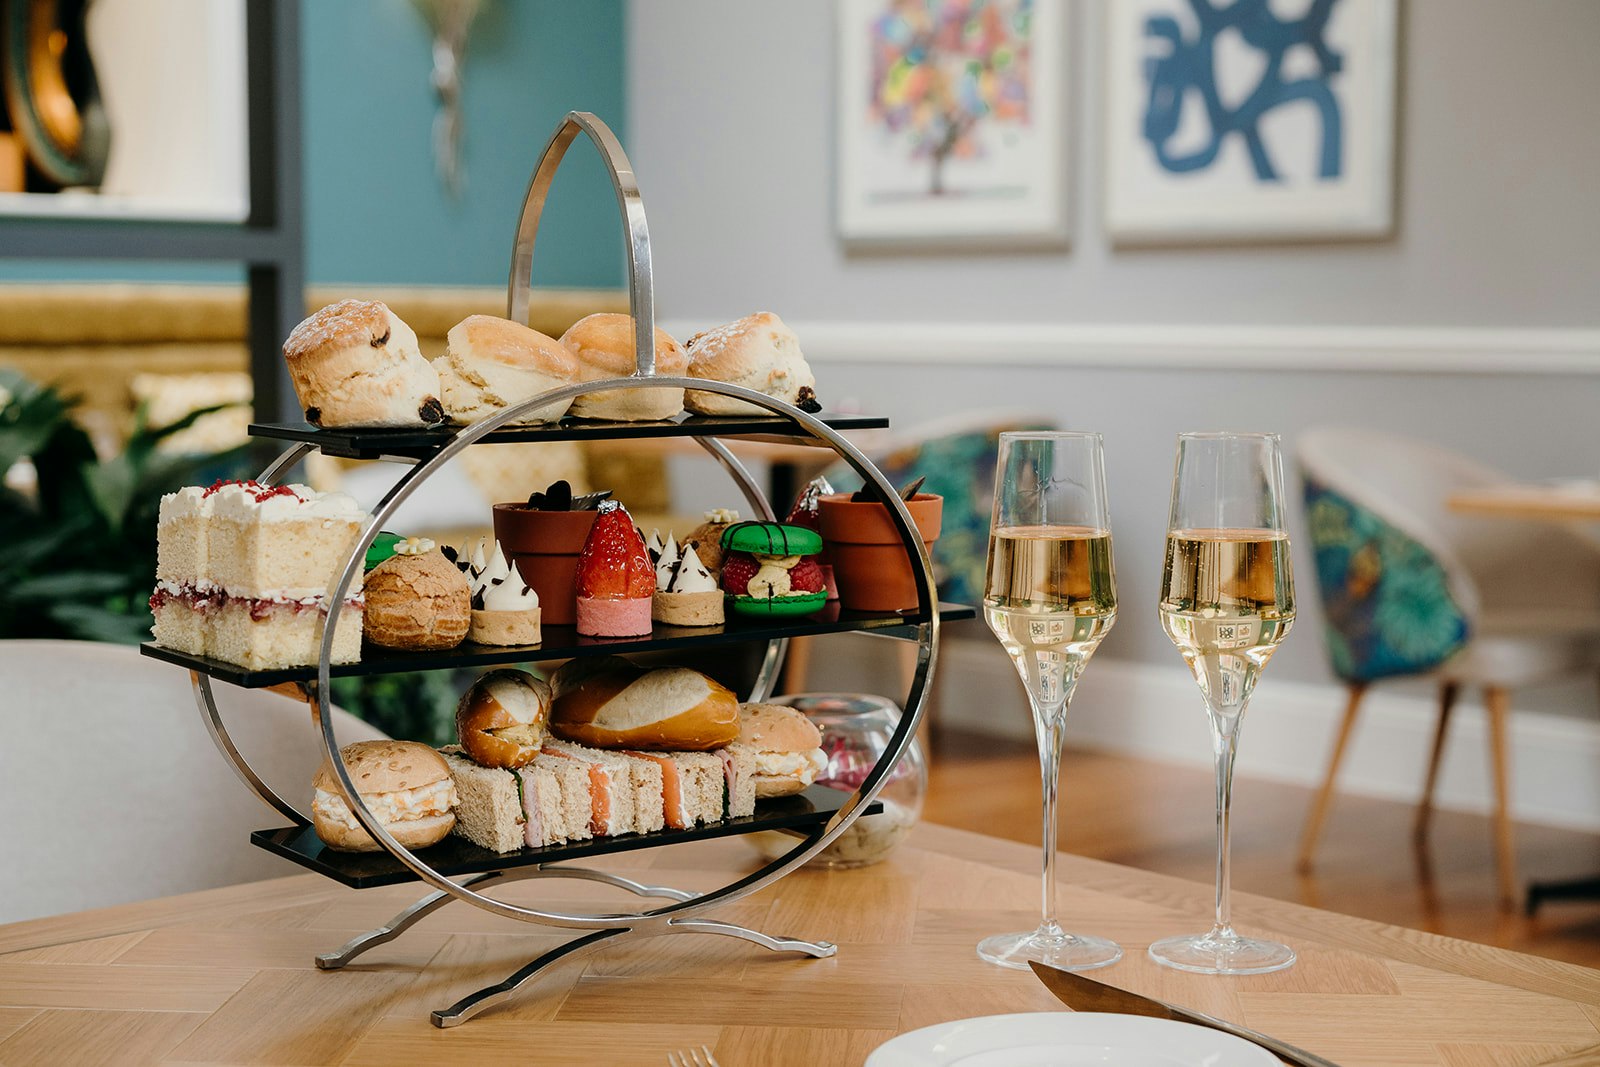 A cake stand for an afternoon tea. It is full of scones, sandwiches and cakes. There are two glasses of champange next to the stand. Oakley Hall, Basingstoke's  resturant is in the background